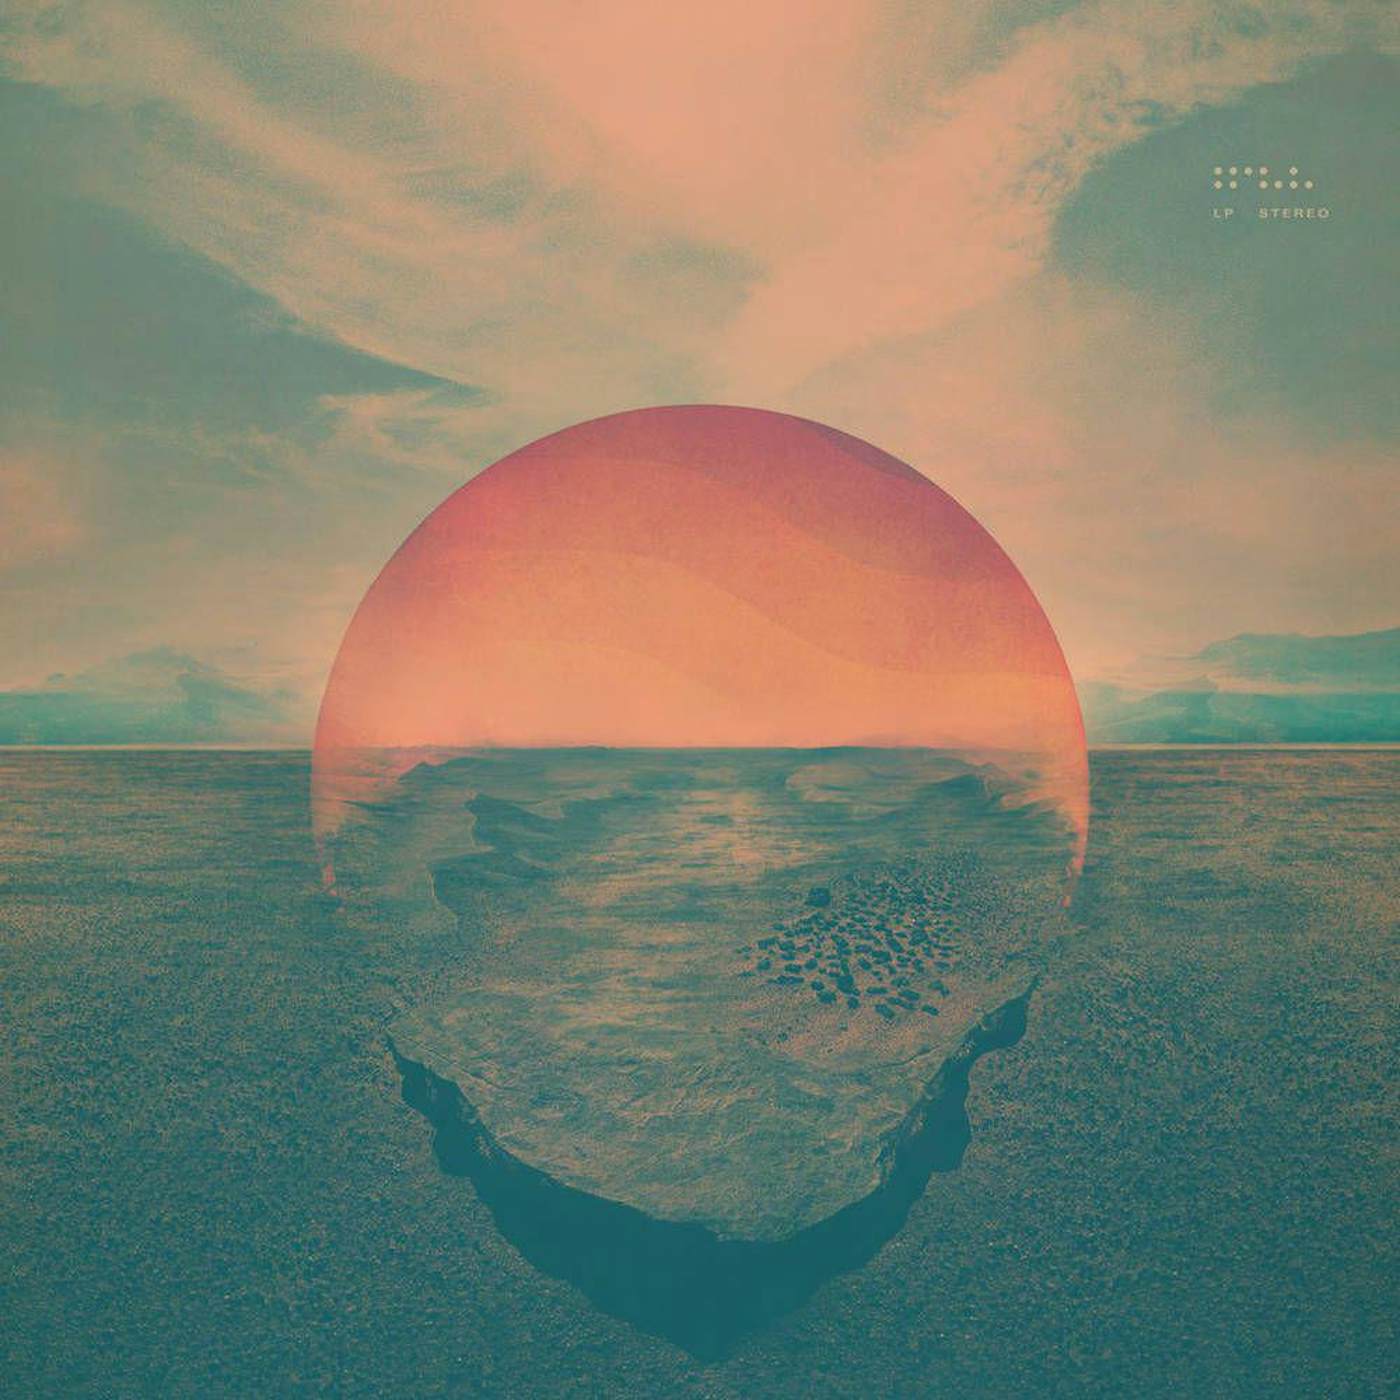 Tycho Dive (10th Anniversary) [Orange & Red Marbled] Vinyl Record